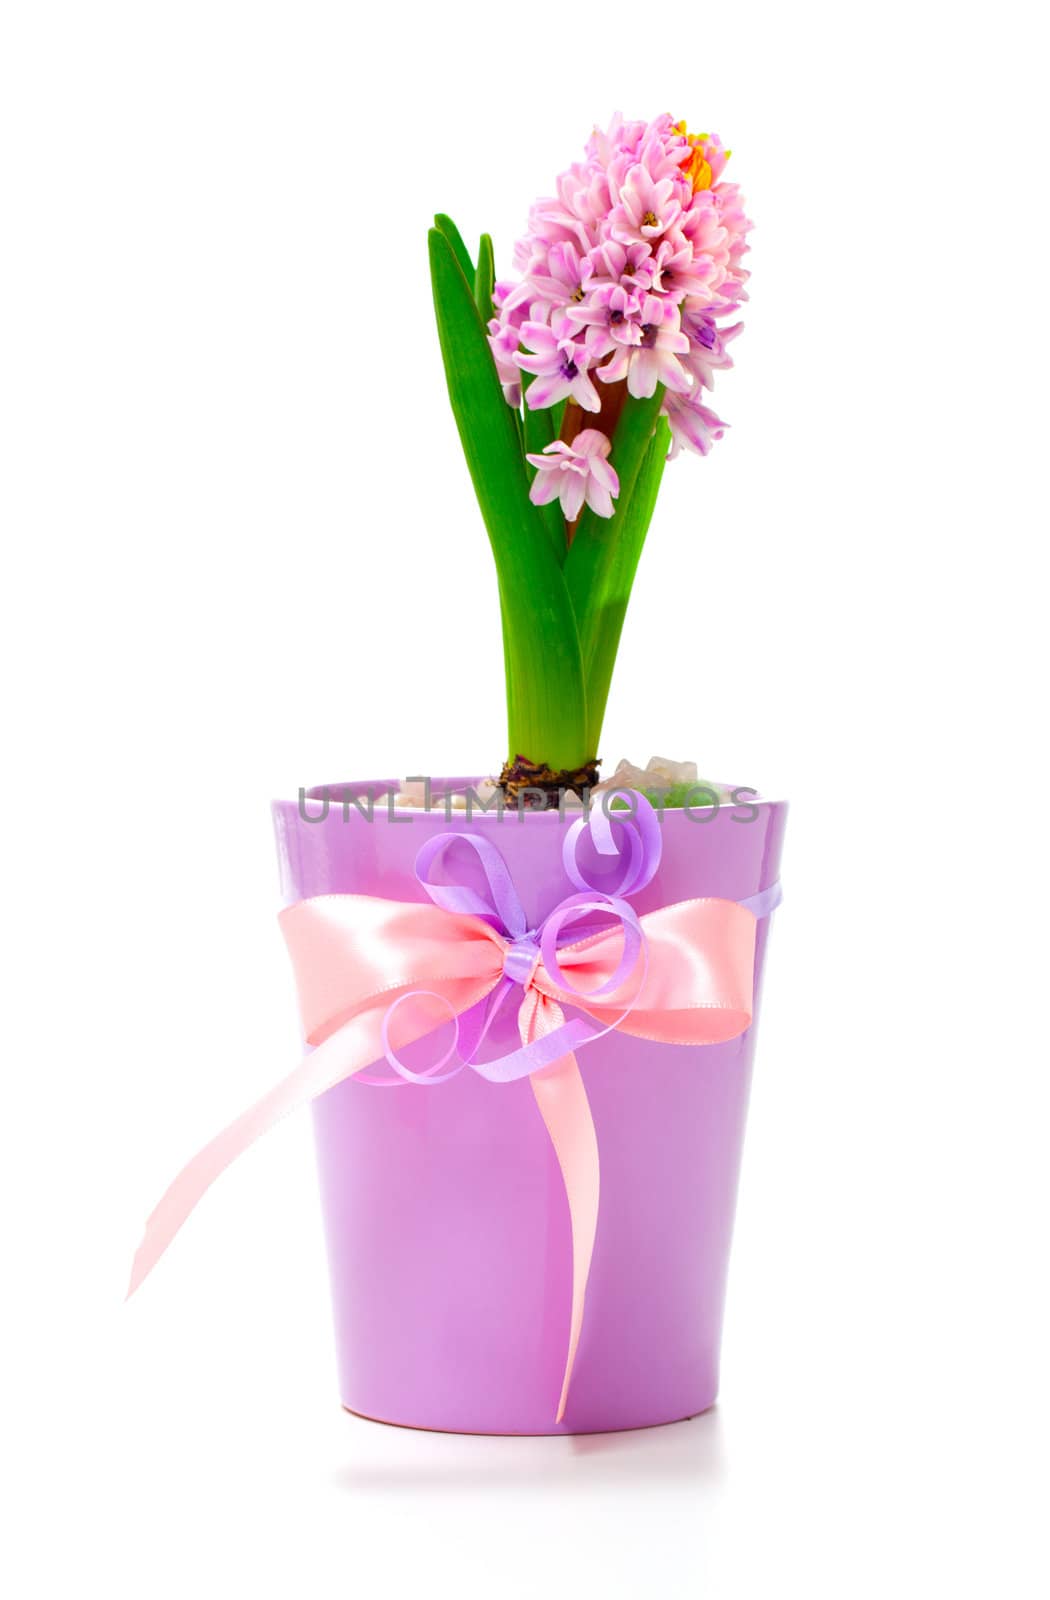 pink hyacinth flowers, isolated on white background. by motorolka